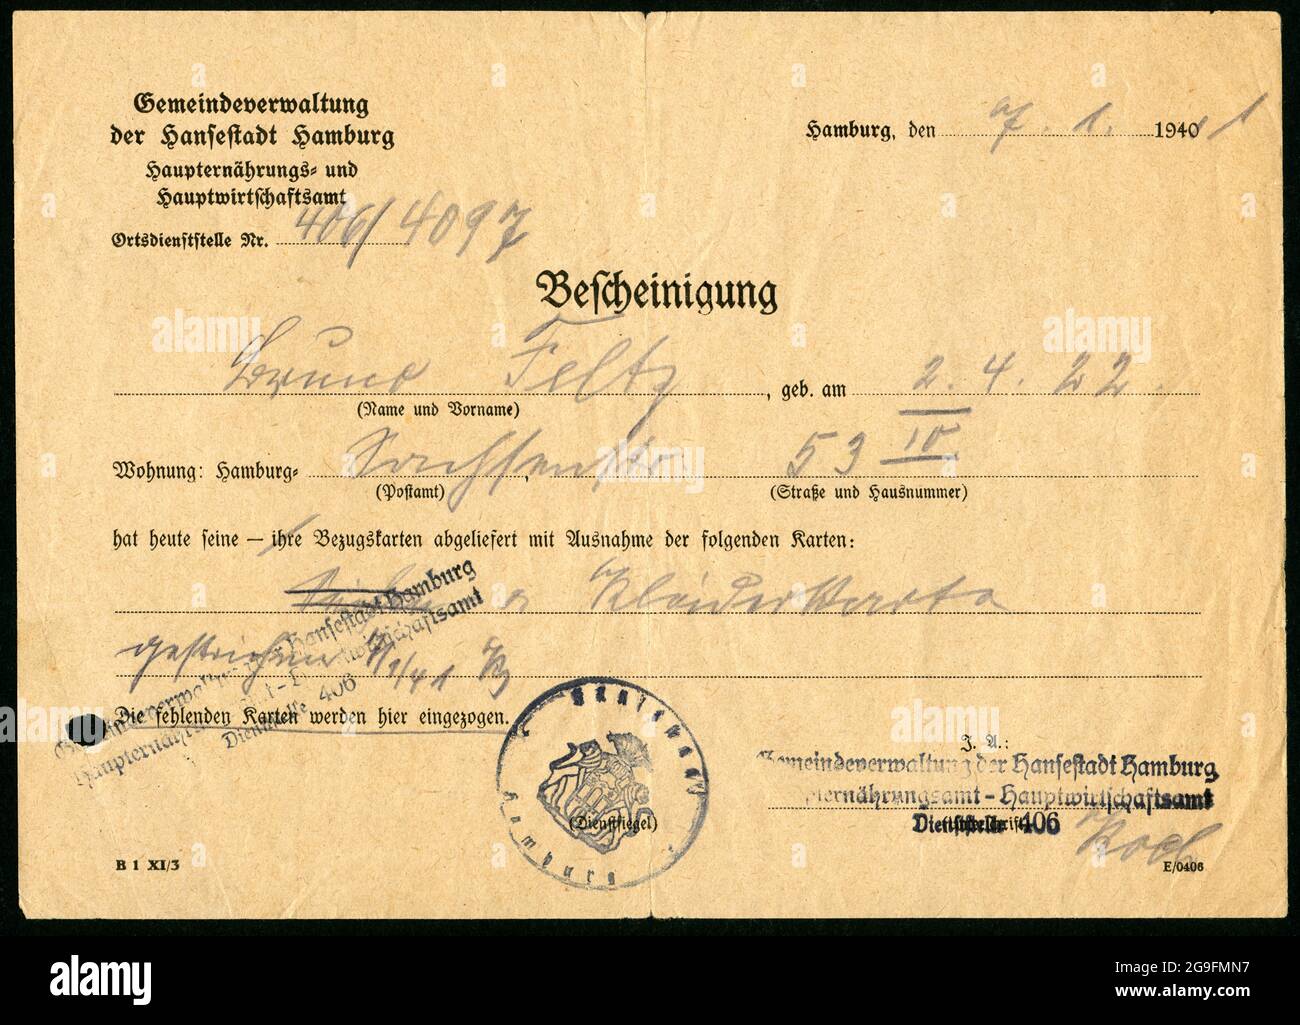 Europe, Germany, Hamburg, confirmation about the return of ration cards except for ration cards for clothes, EDITORIAL-USE-ONLY Stock Photo